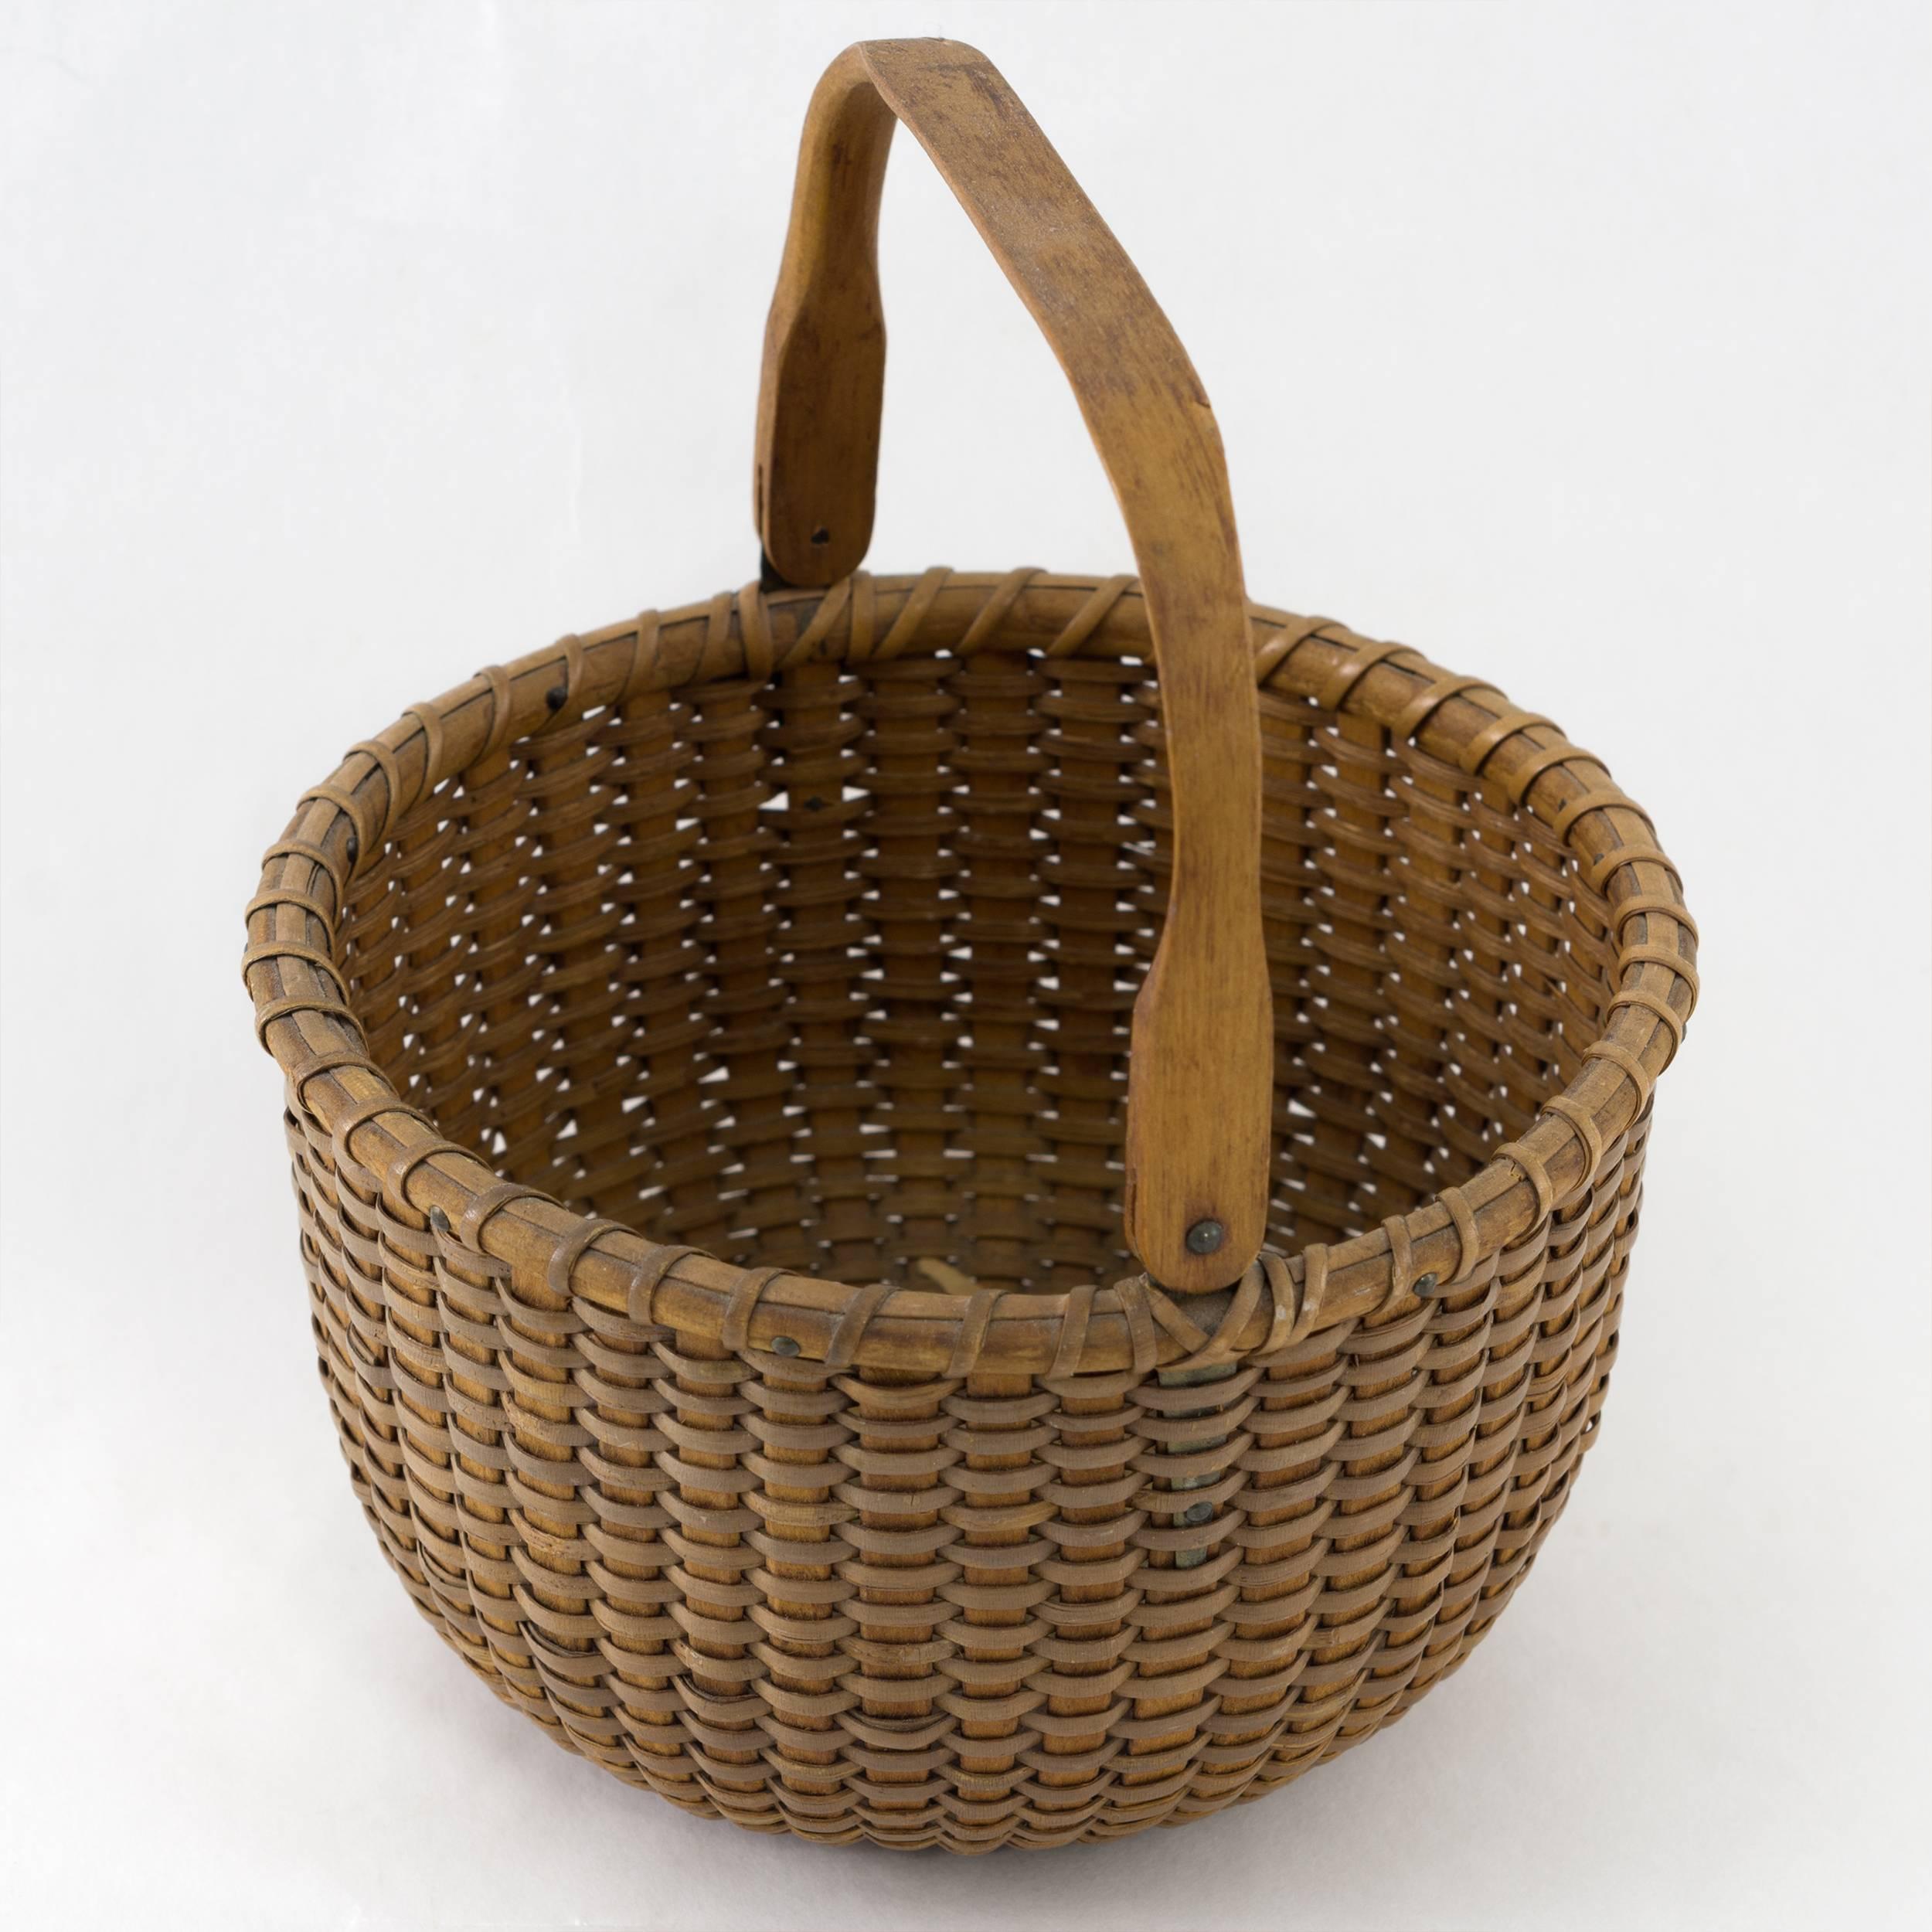 A great basket in excellent condition made by Sherwin Porter Boyer (1907-1964). Made with oak staves and carved oak handle that is attached with brass ears. The basket bears Boyers stamp on the bottom with 